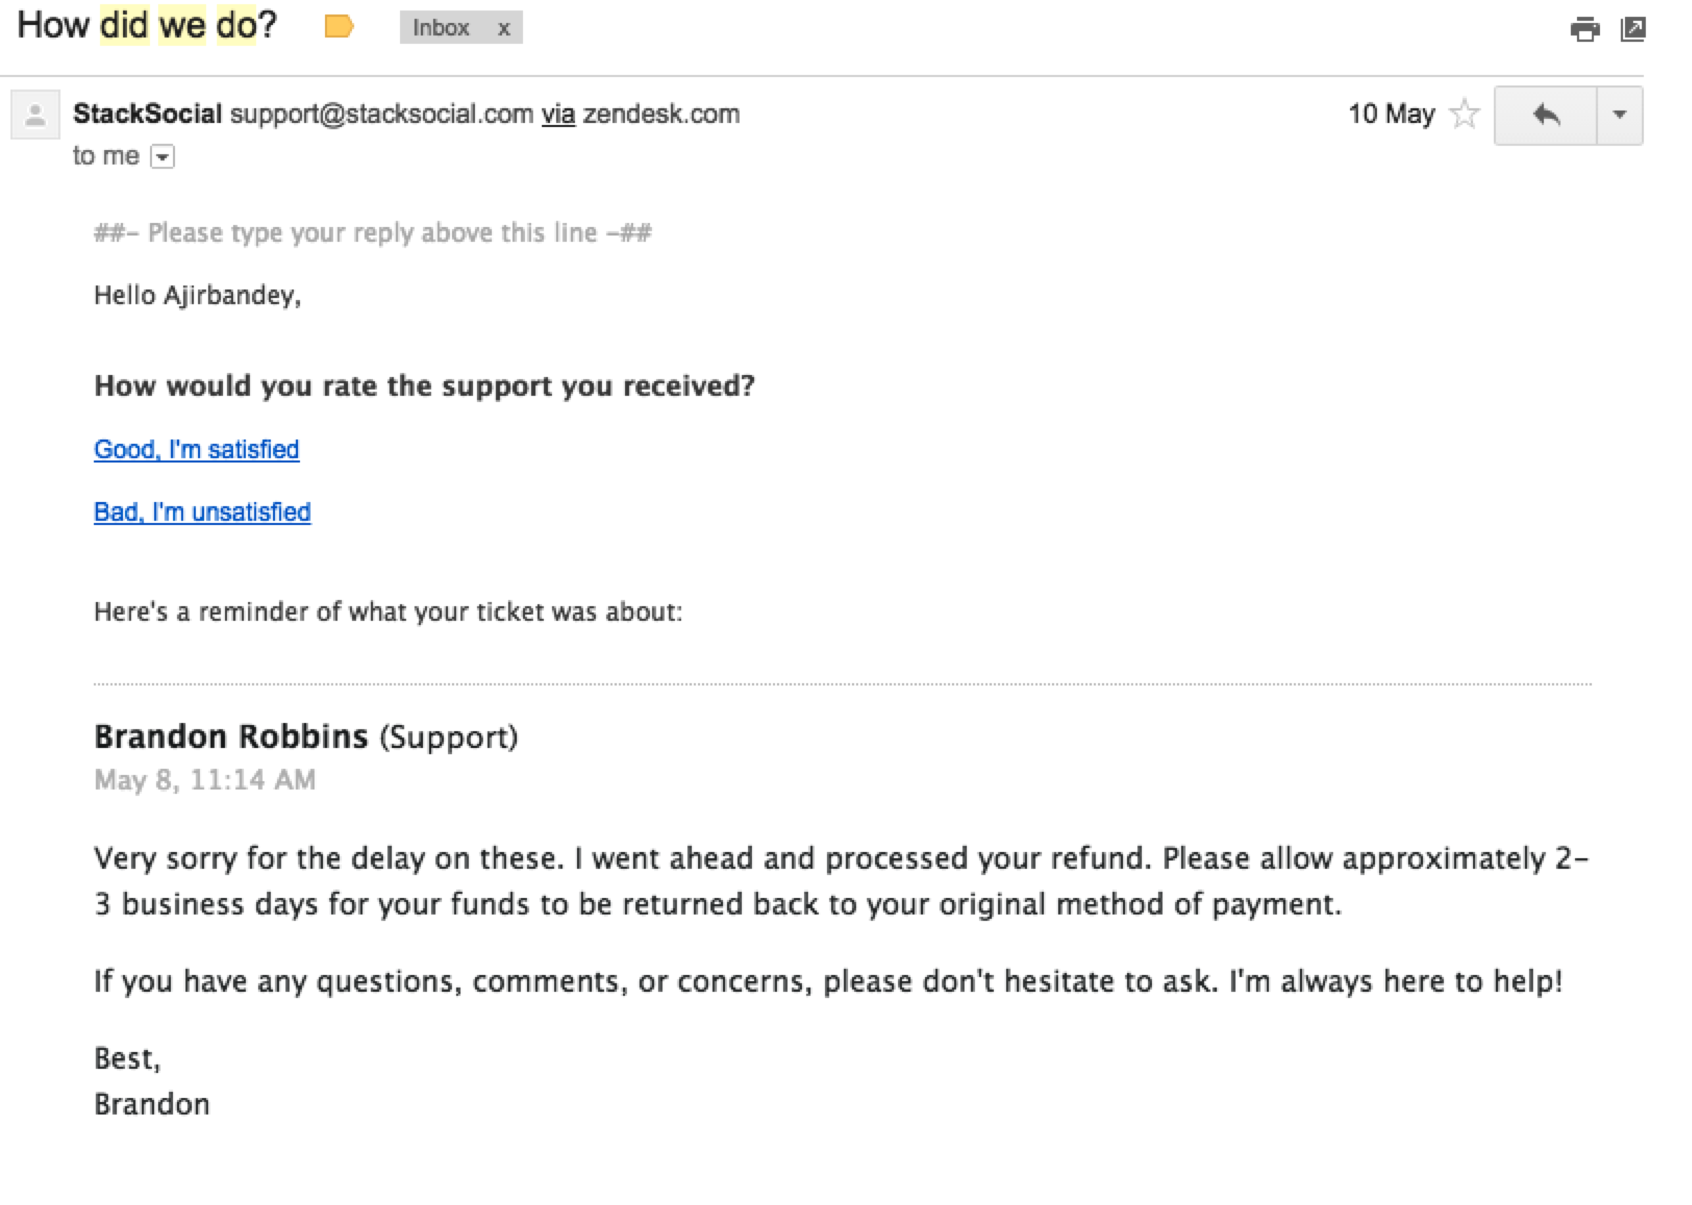 Reply to this email. Email support. A Formal email to Bank. How to response to email for the meeting. Support email Template.